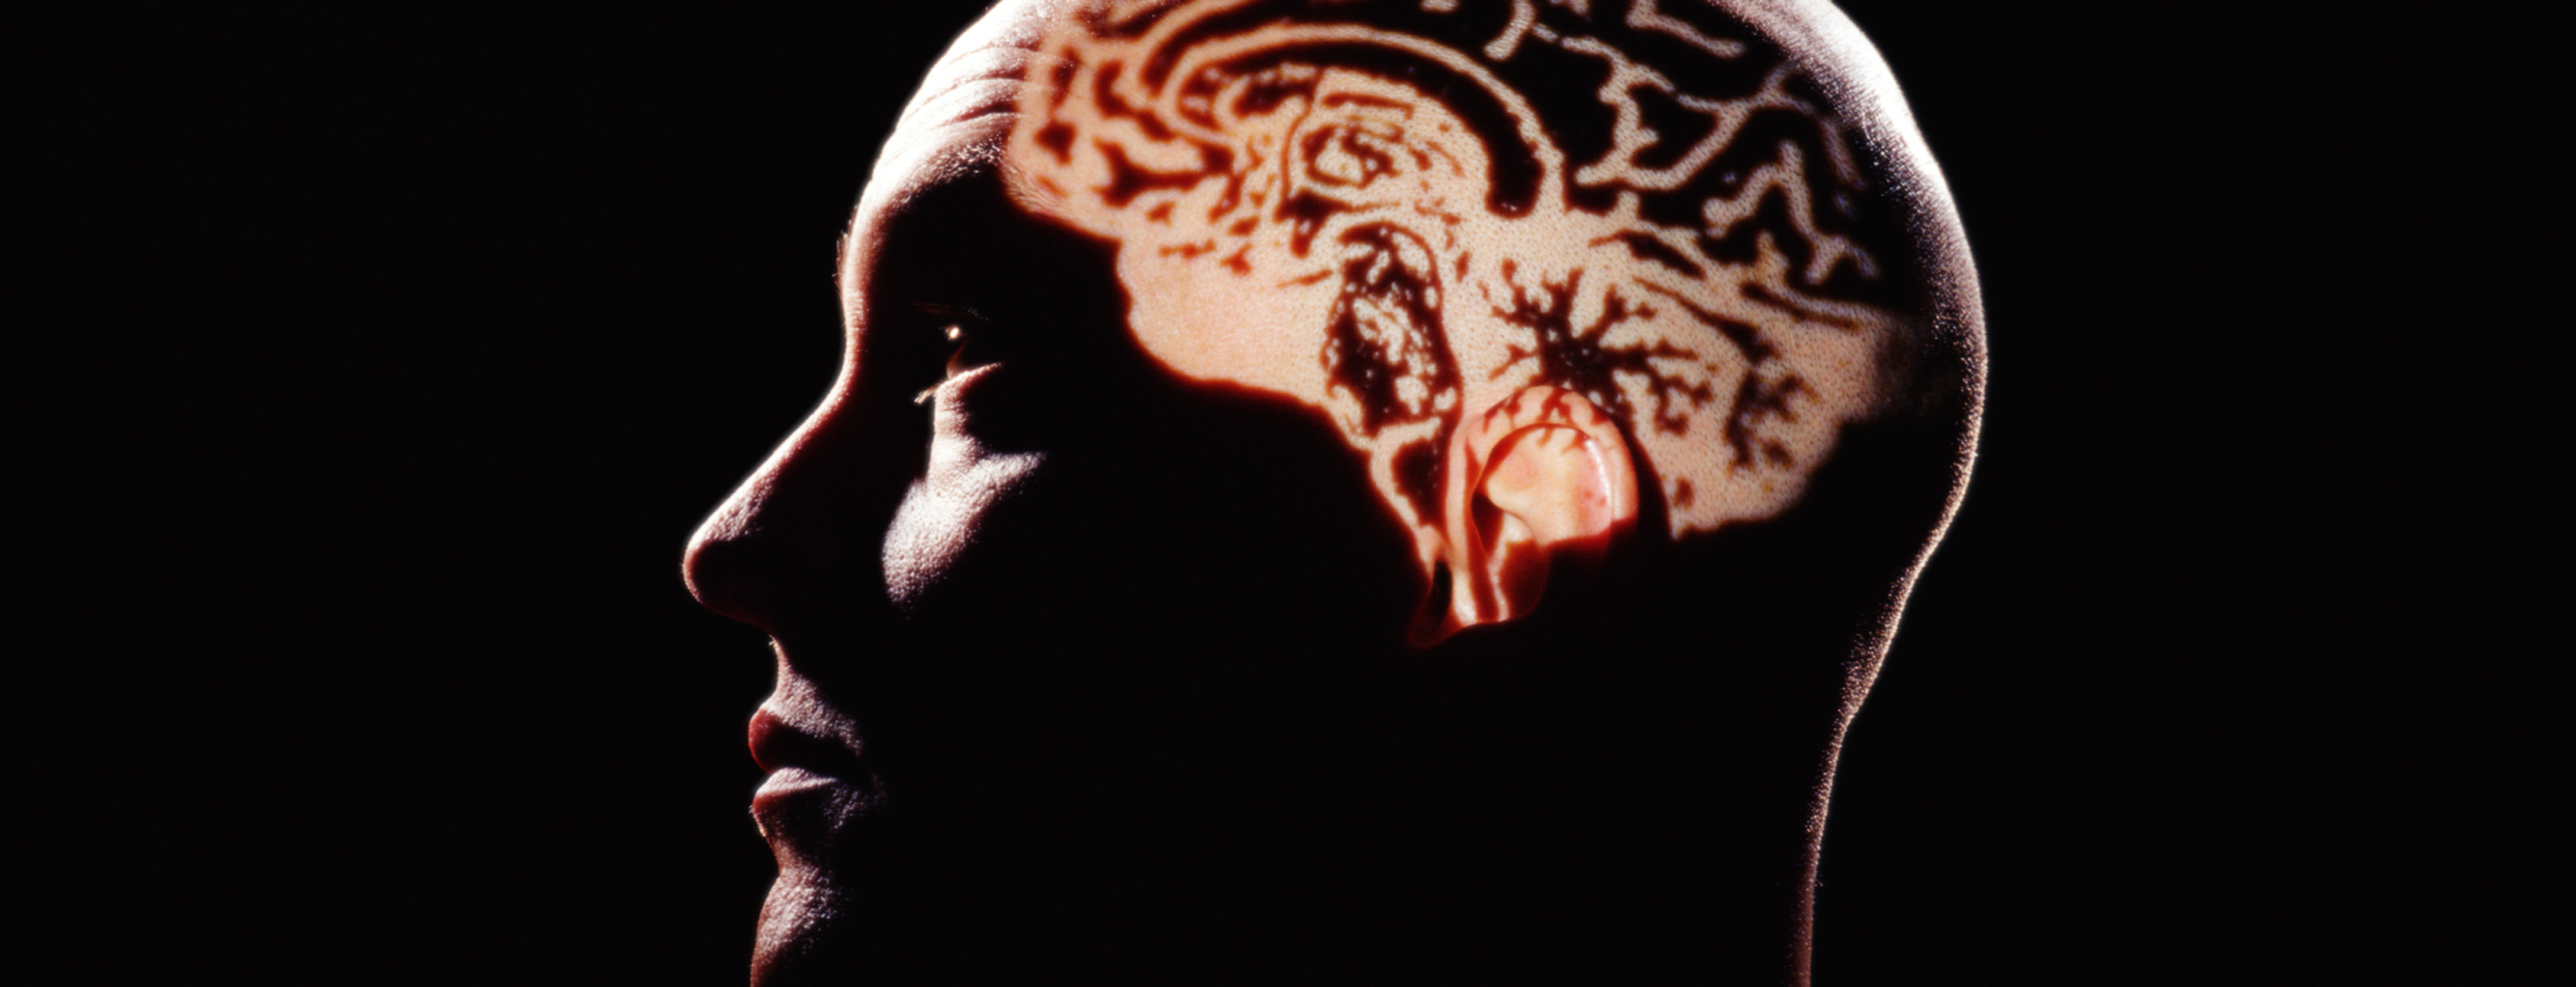 Brain illustration projected on a persons head